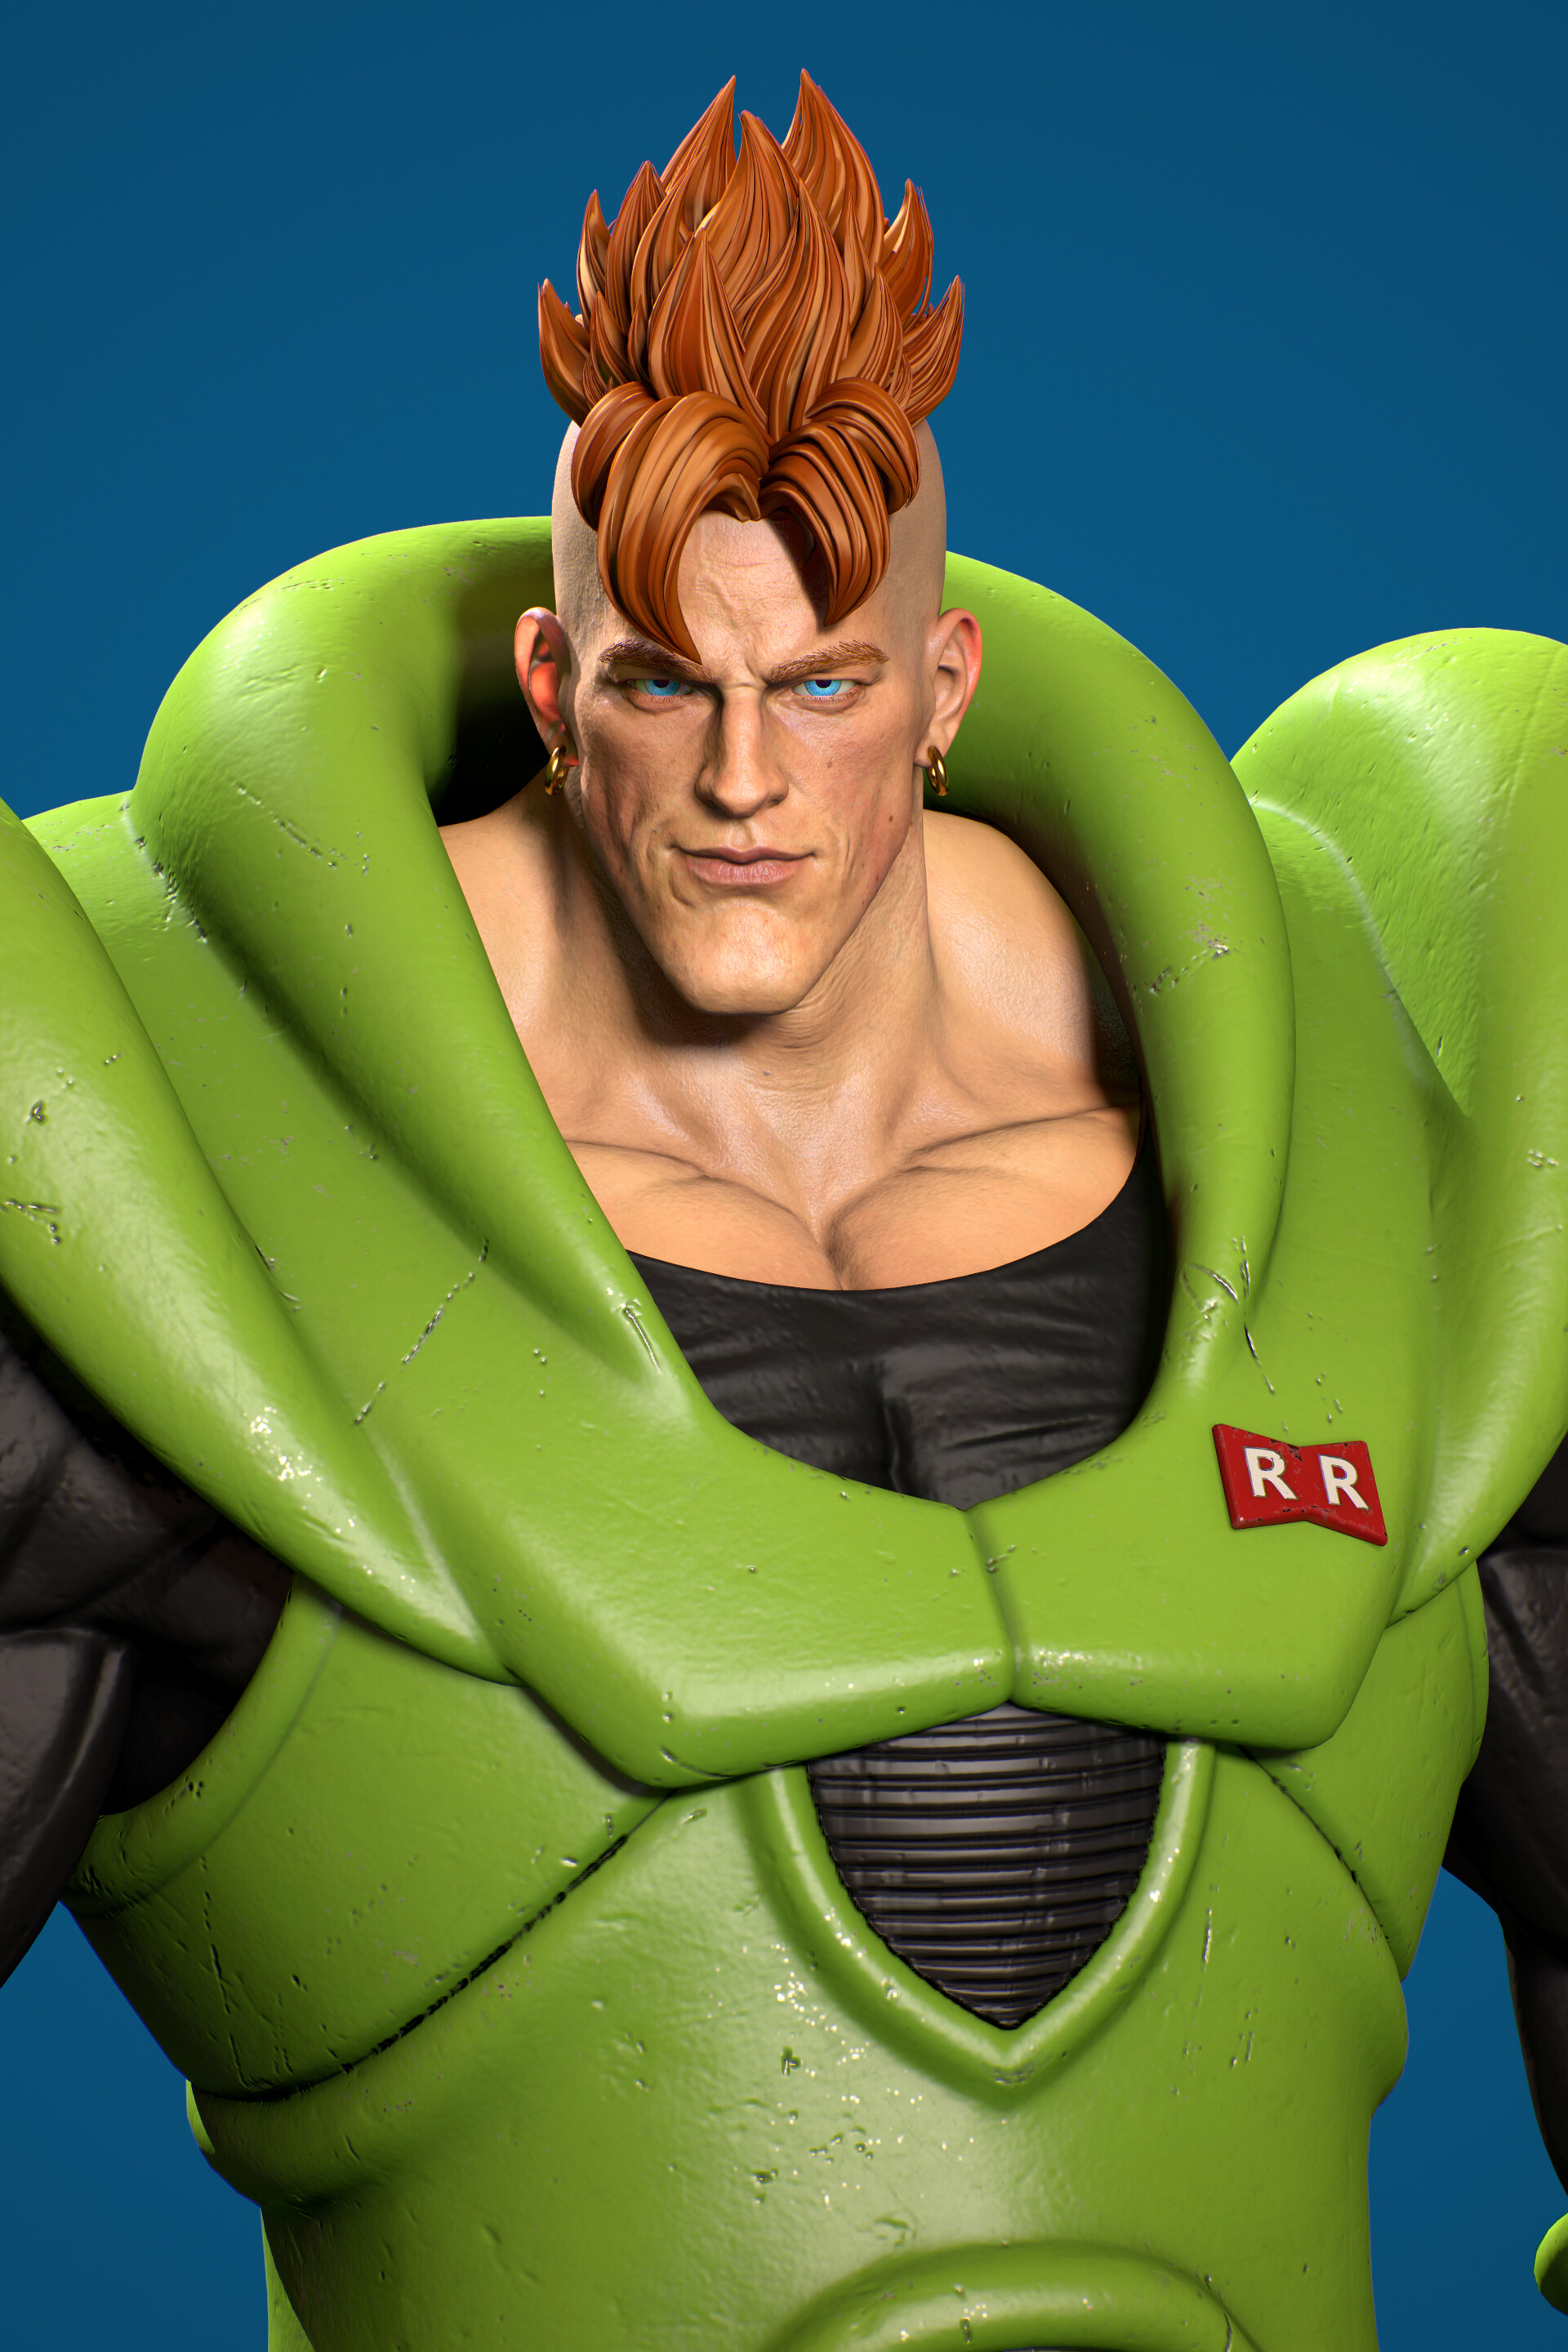 Android 16 Fan Casting